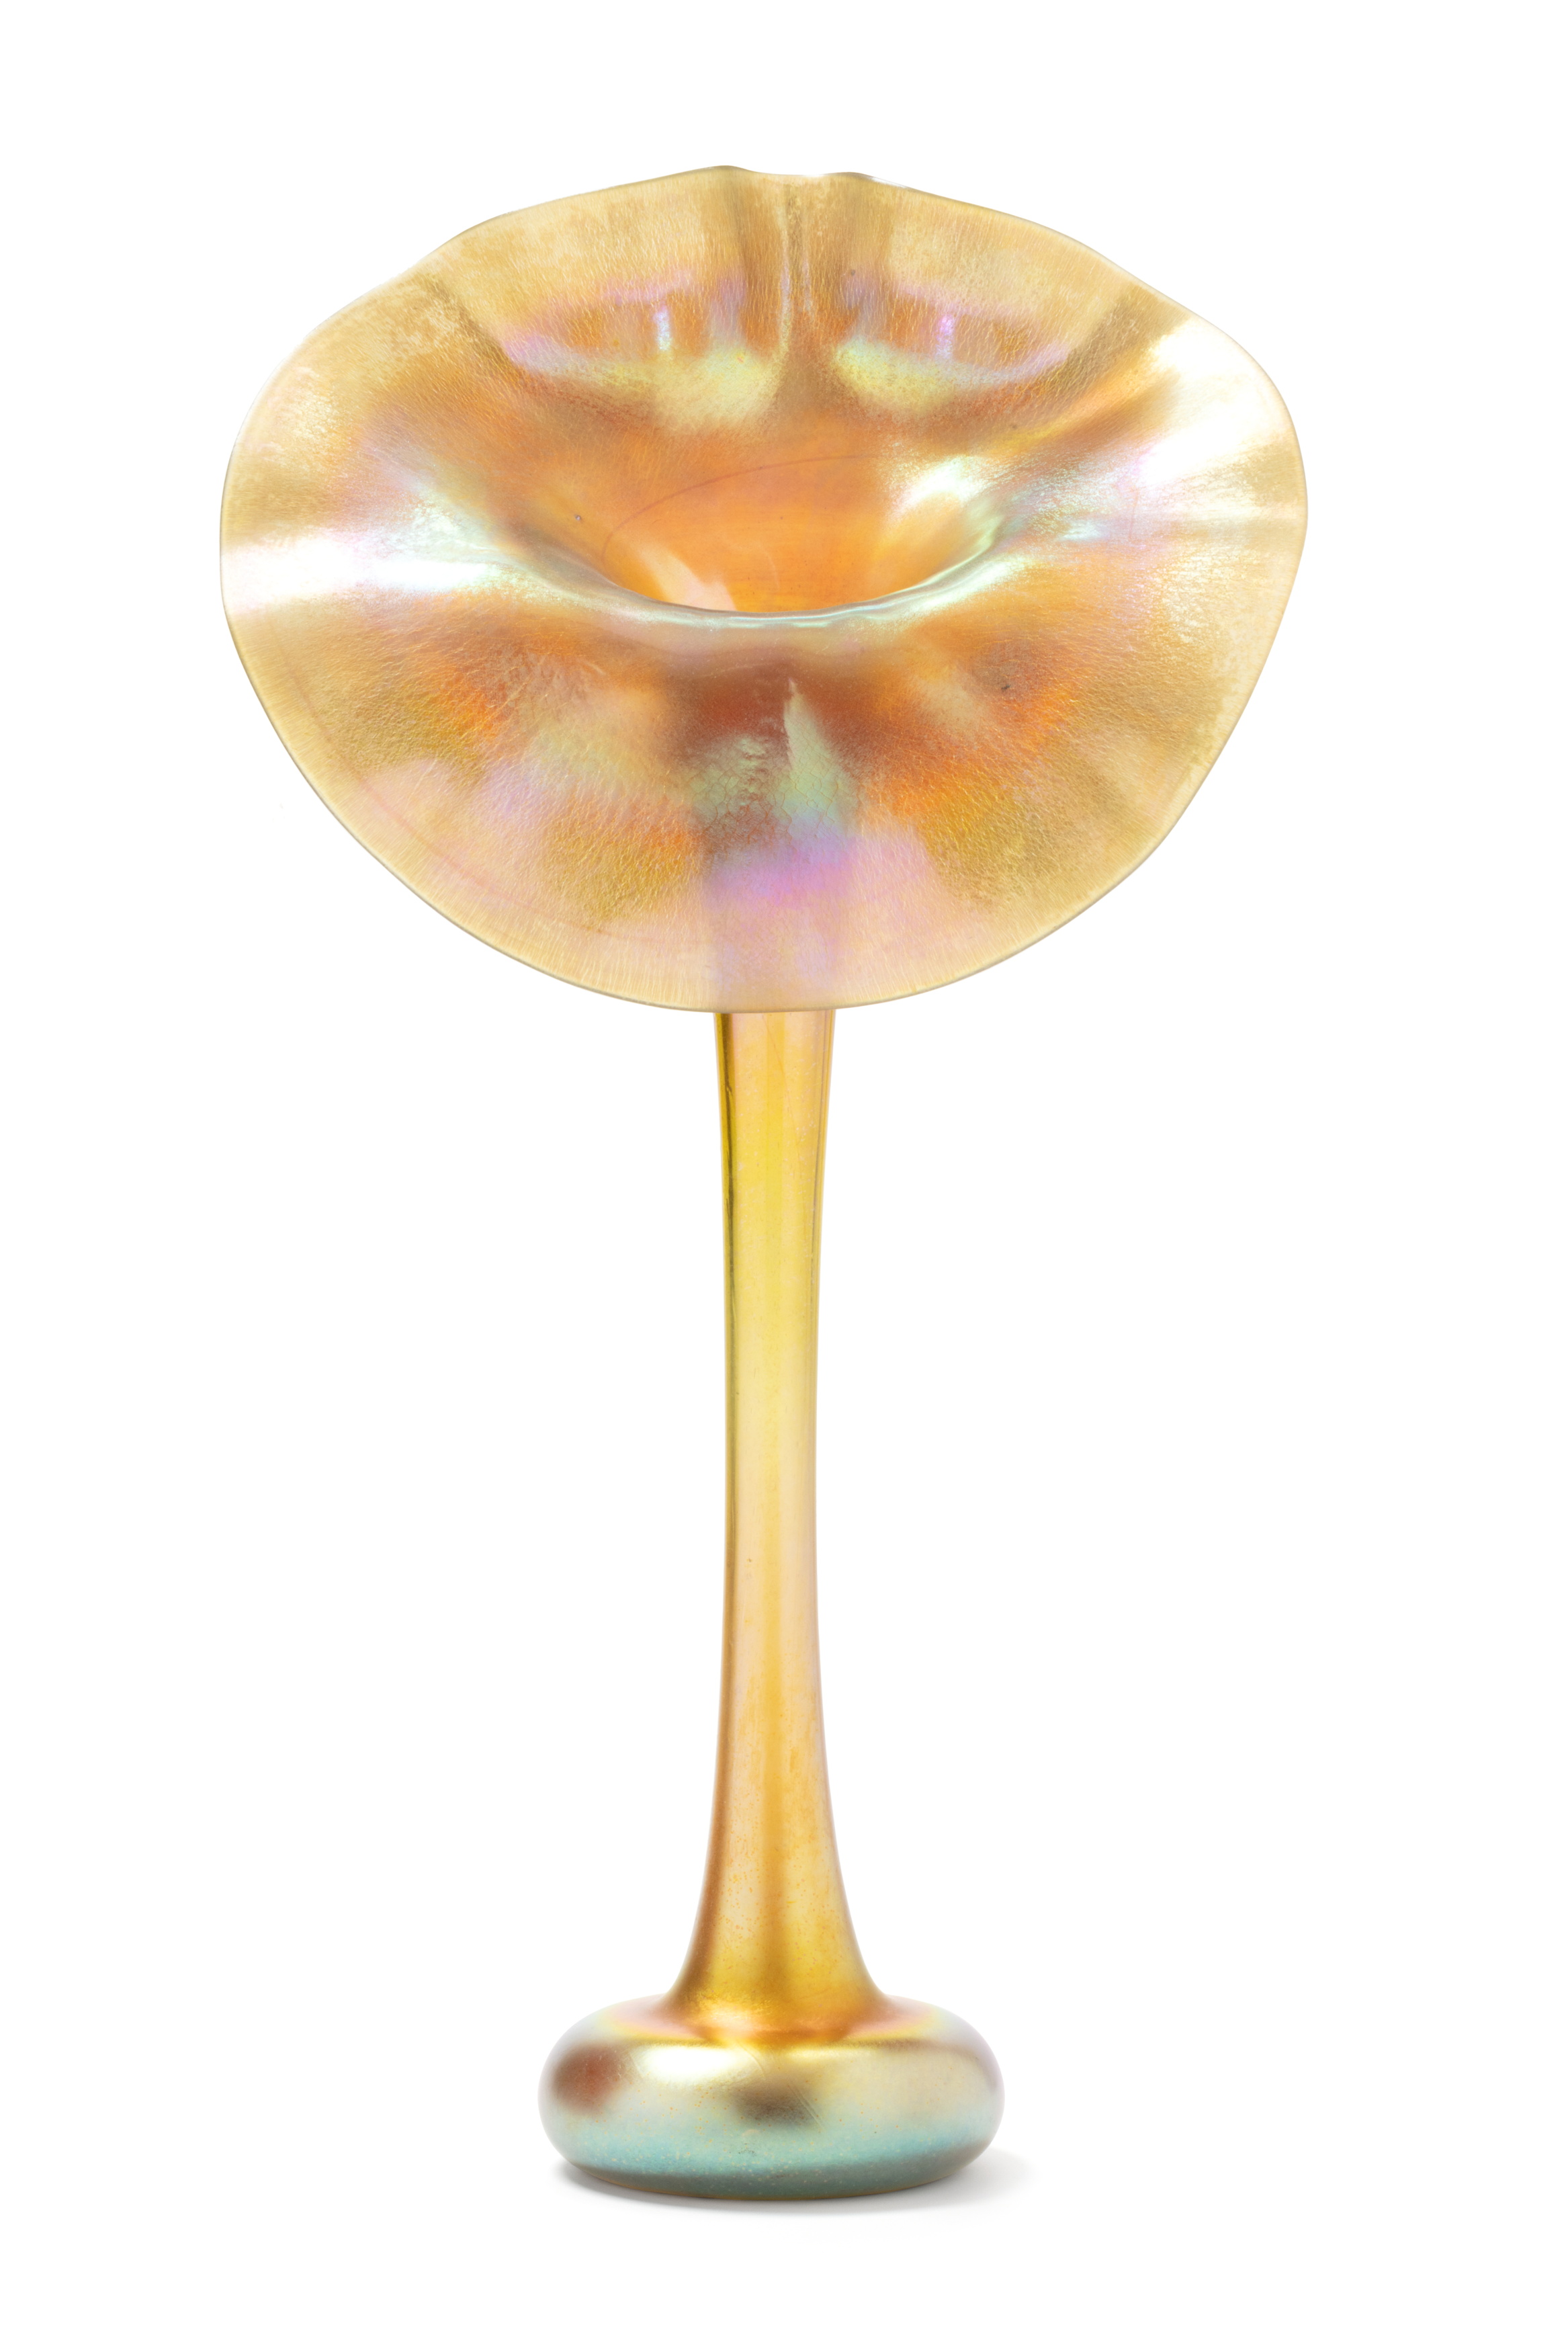 'Jack in the pulpit' vase by Tiffany